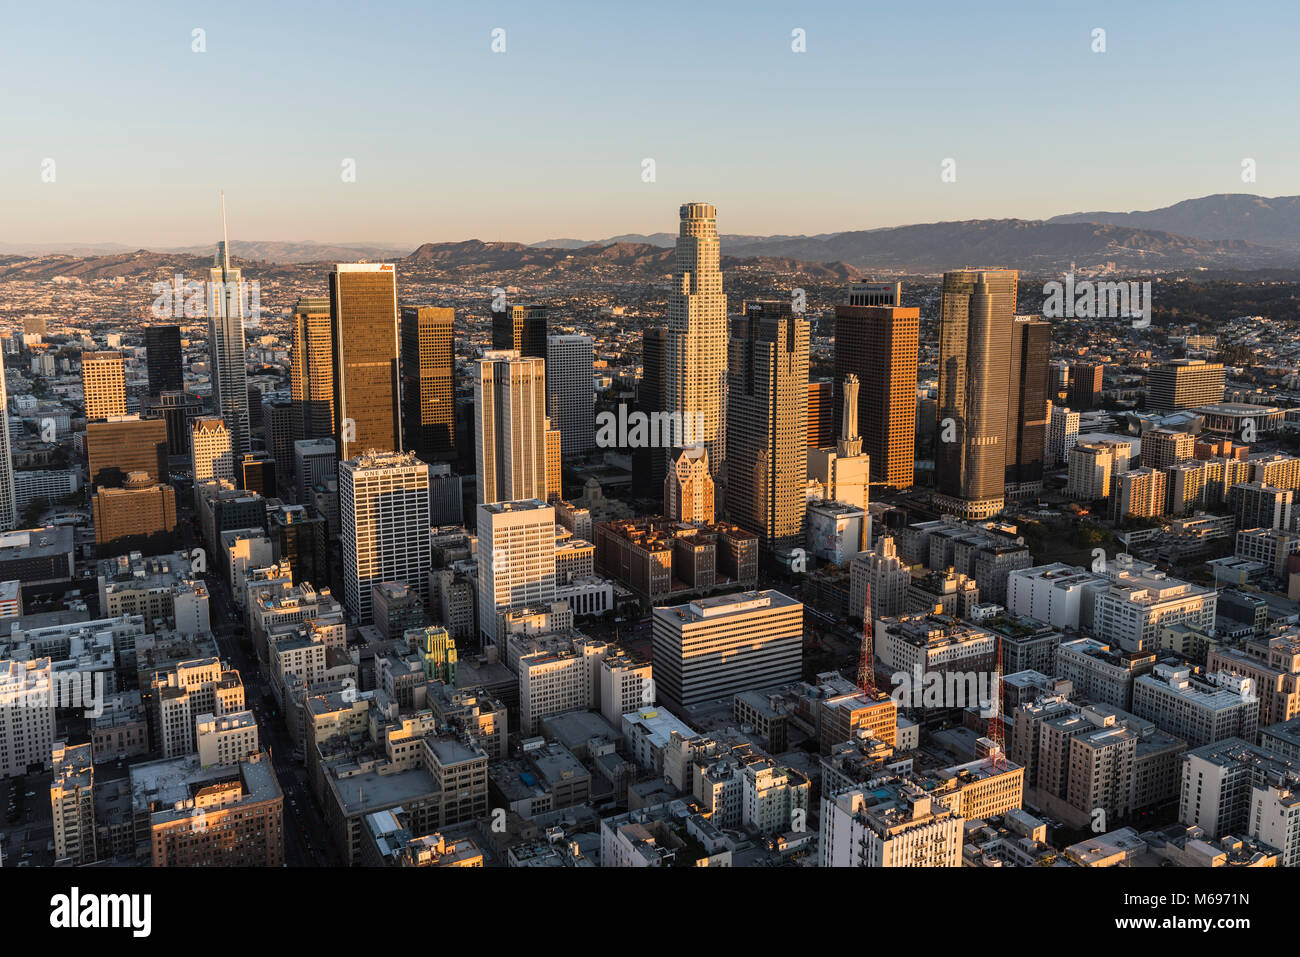 Los Angeles, California, USA - February 20, 2018:  Early morning aerial view of towers, streets and buildings in the urban core of downtown LA. Stock Photo